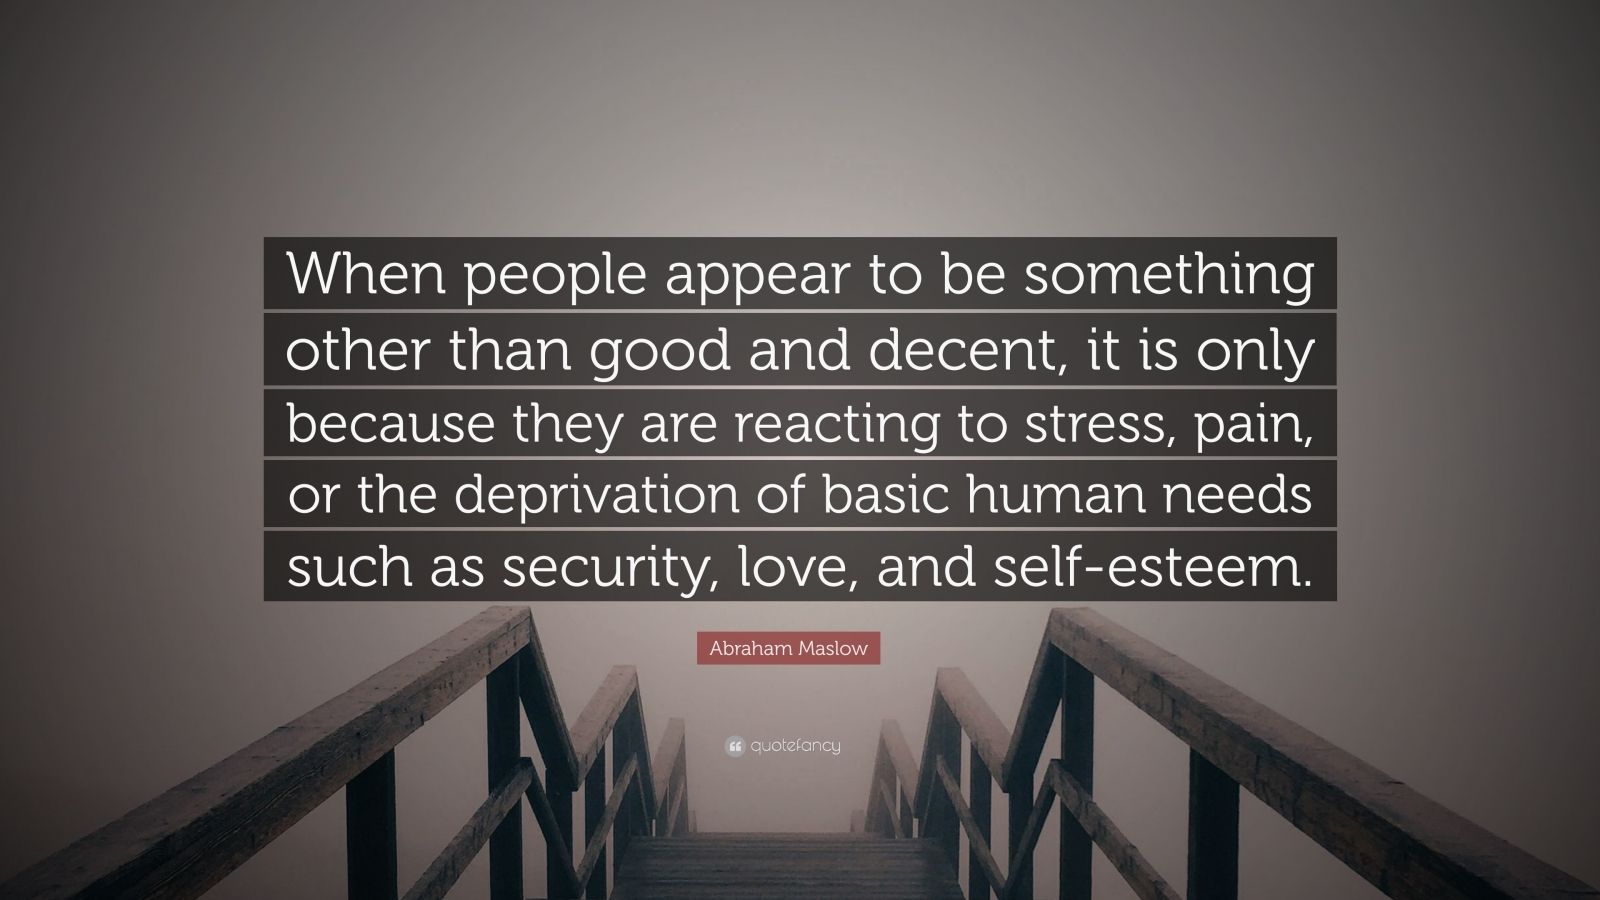 Abraham Maslow Quote: “When people appear to be something other than good and decent, it is only because they are reacting to stress, pain, or the deprivation of basic human needs such as security, love, and self-esteem.”